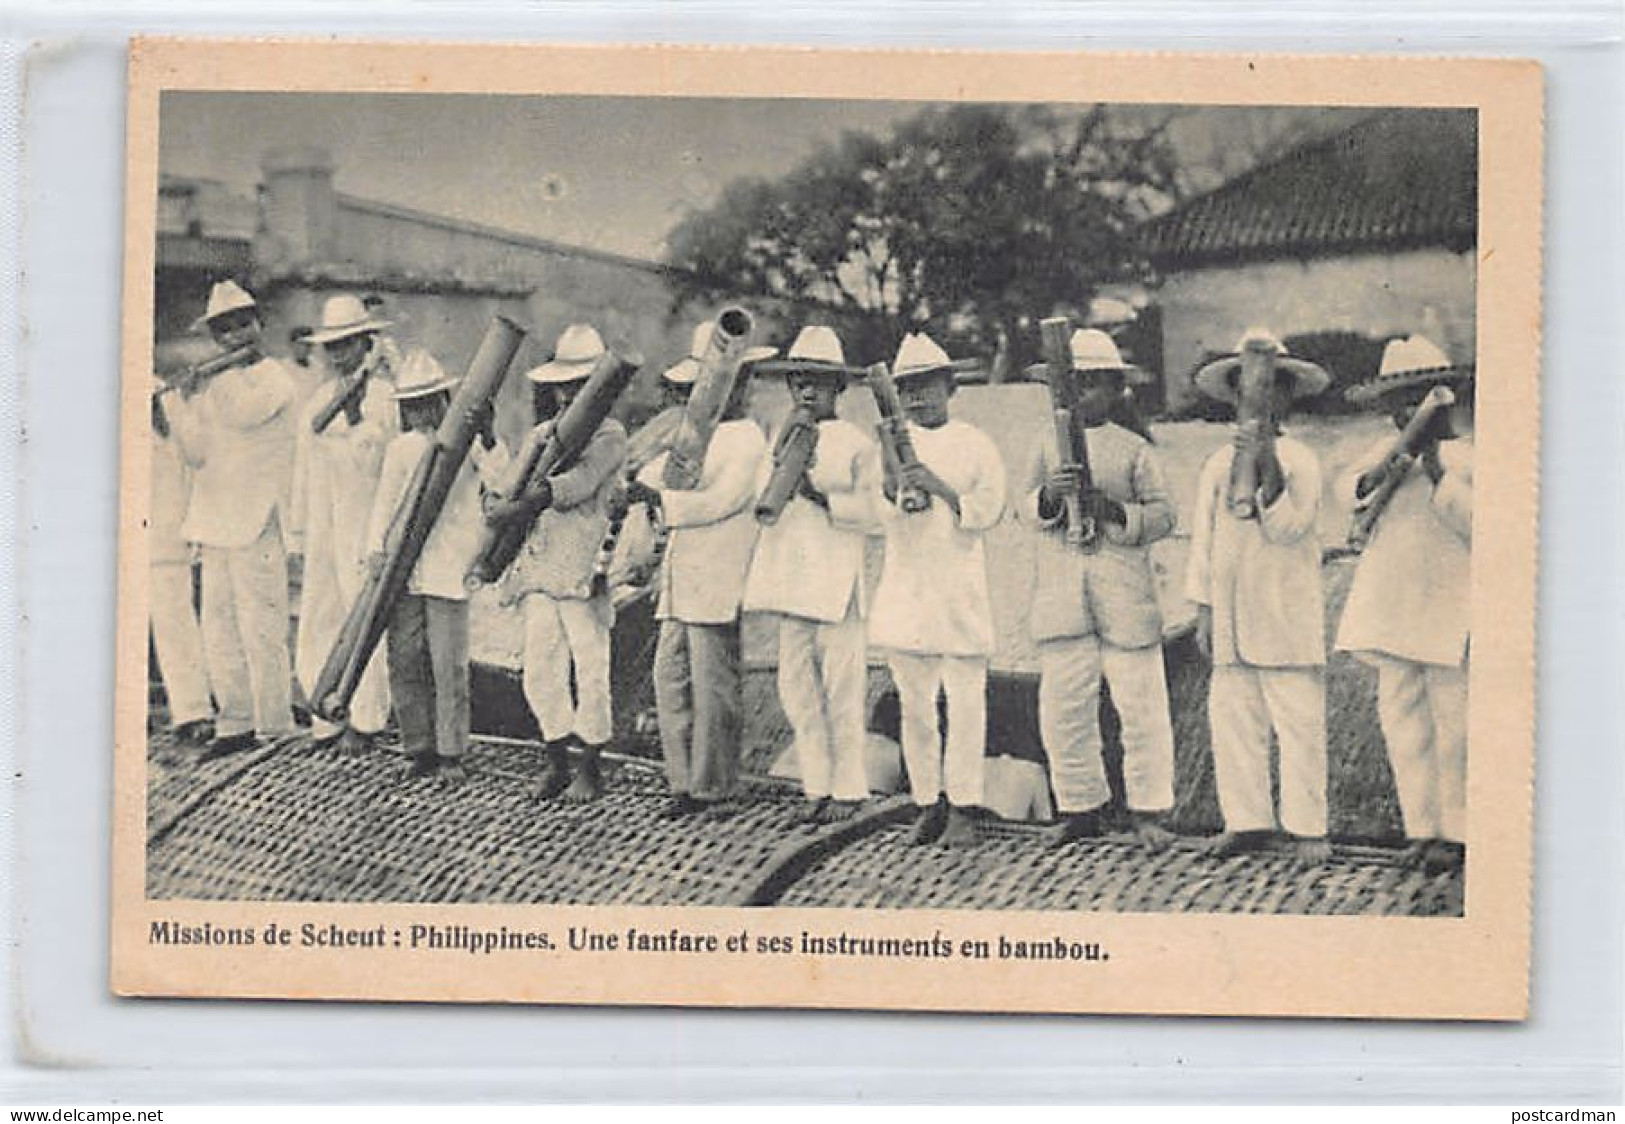 Philippines - A Marching Band And Its Bamboo Instruments - Publ. Missiën Van Scheut - Scheut Missions  - Filippine